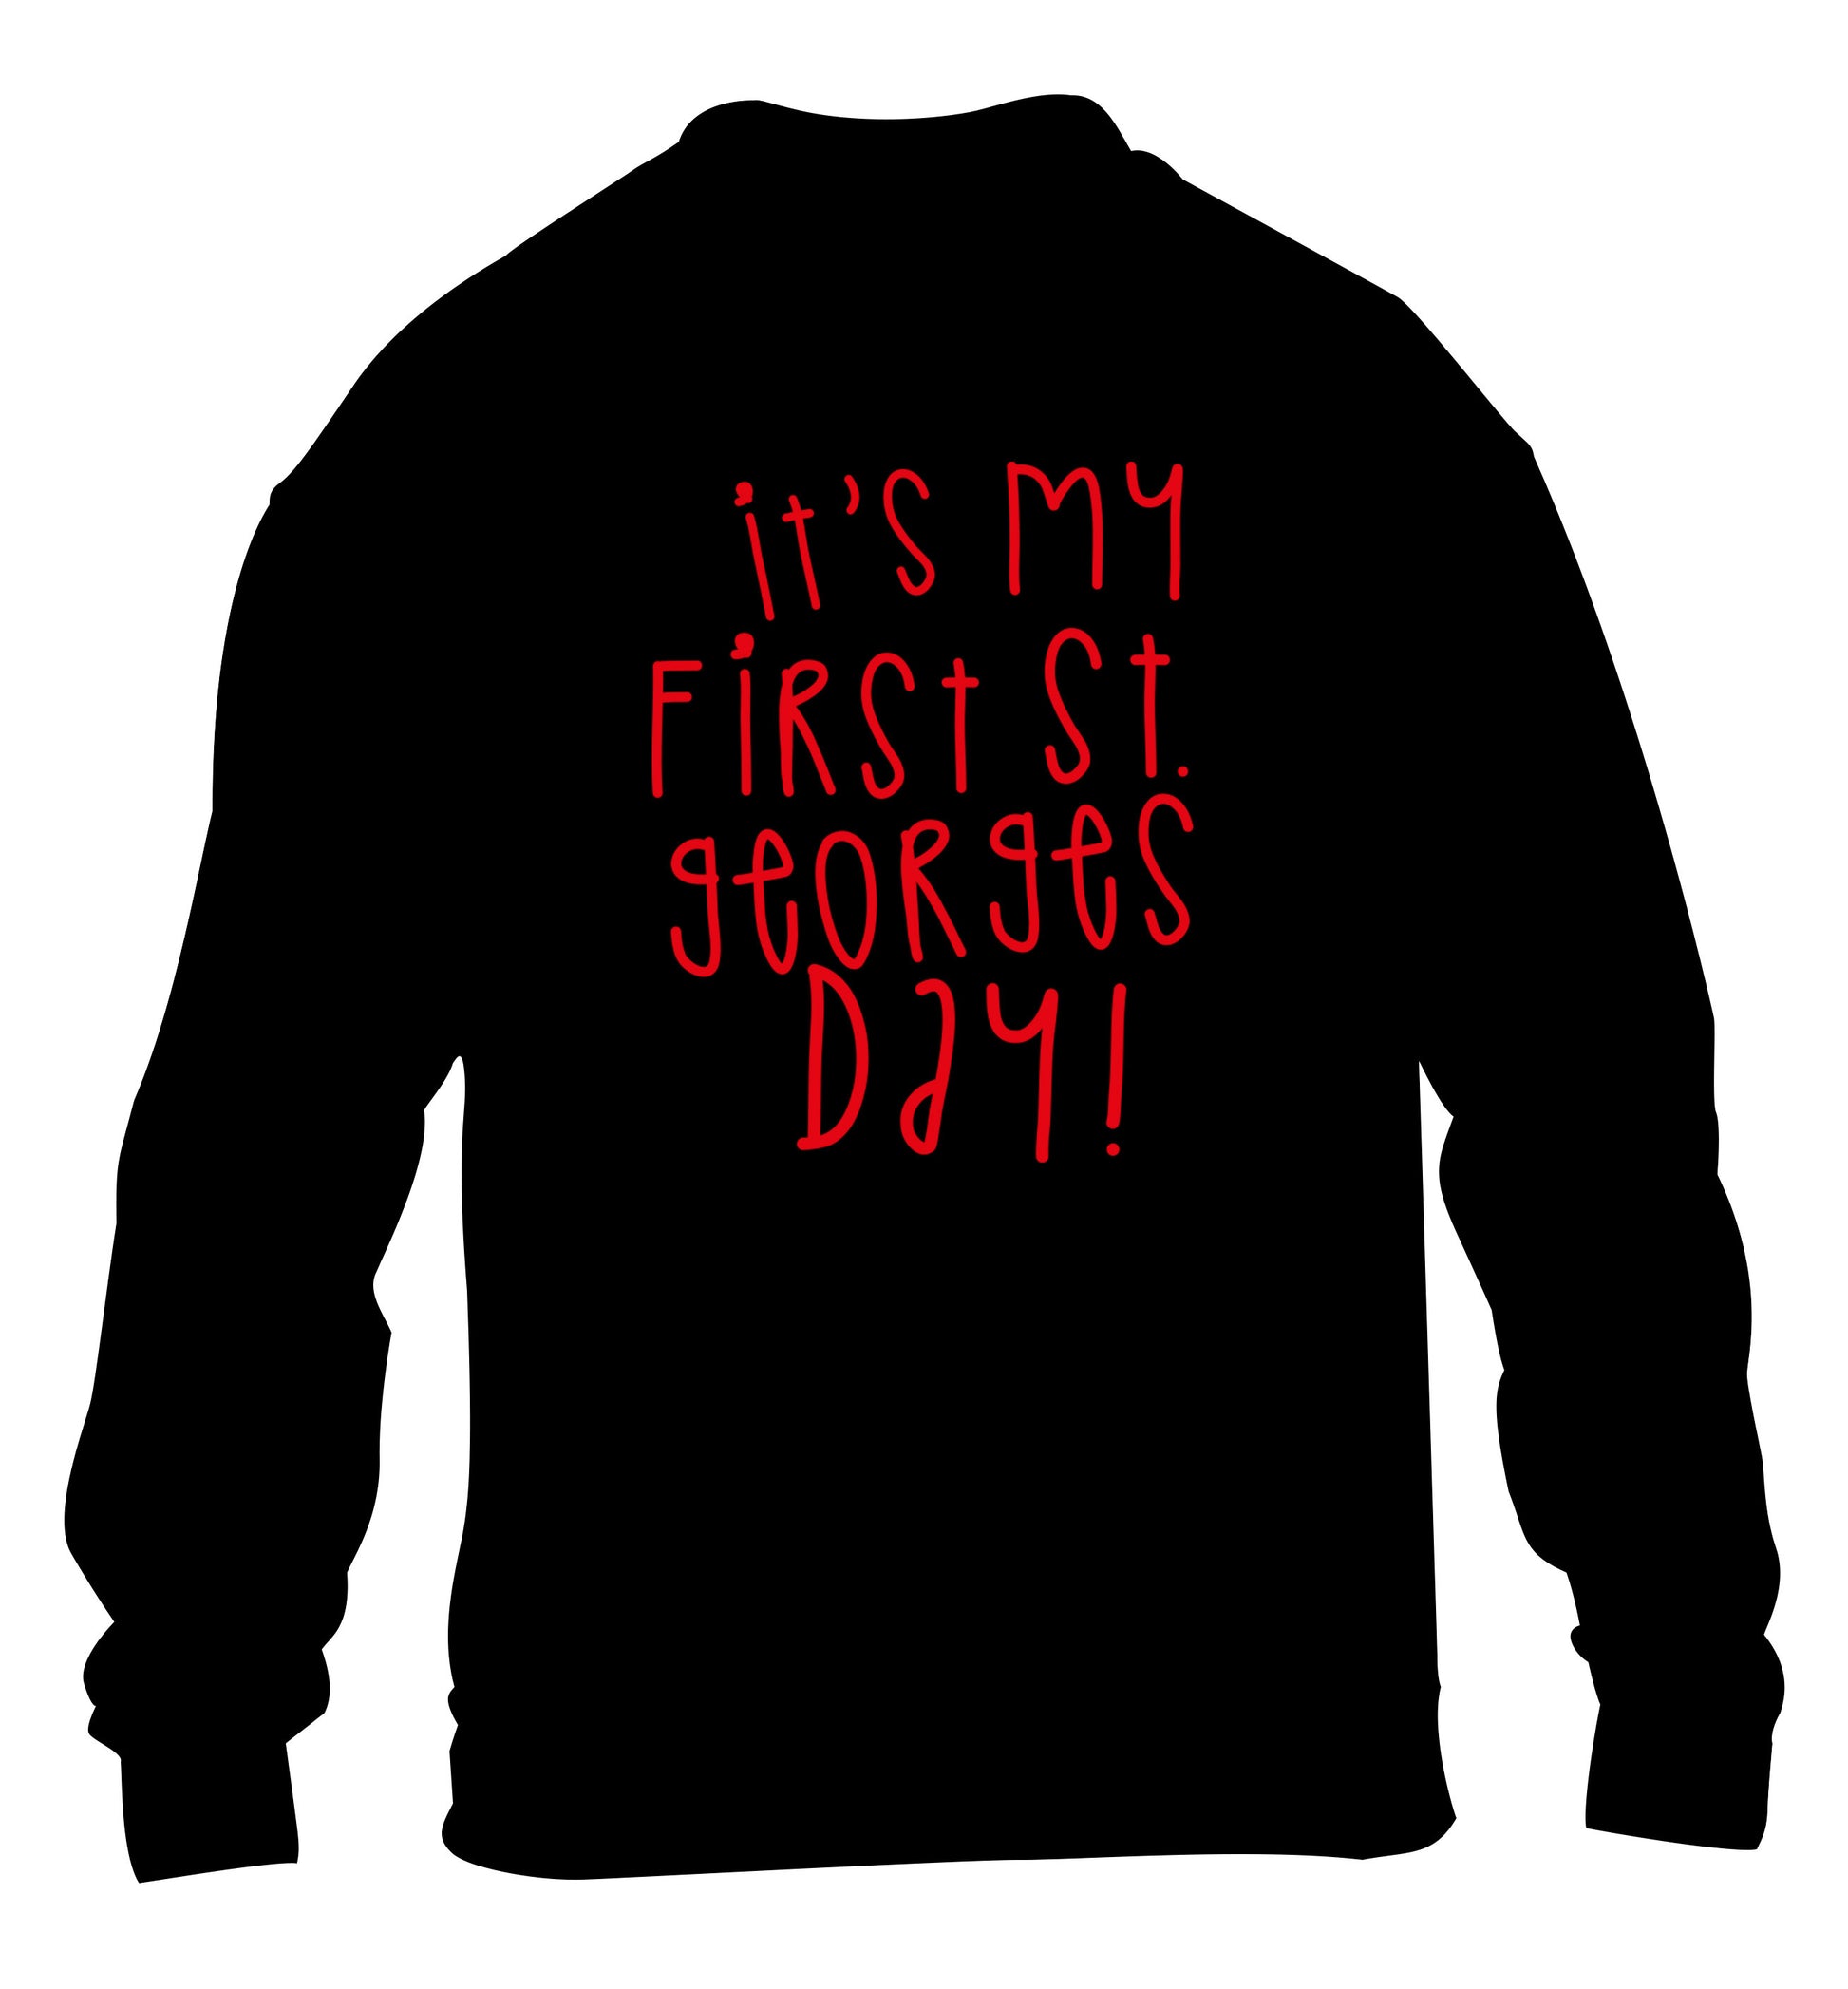 It's my first St Georges day children's black sweater 12-14 Years